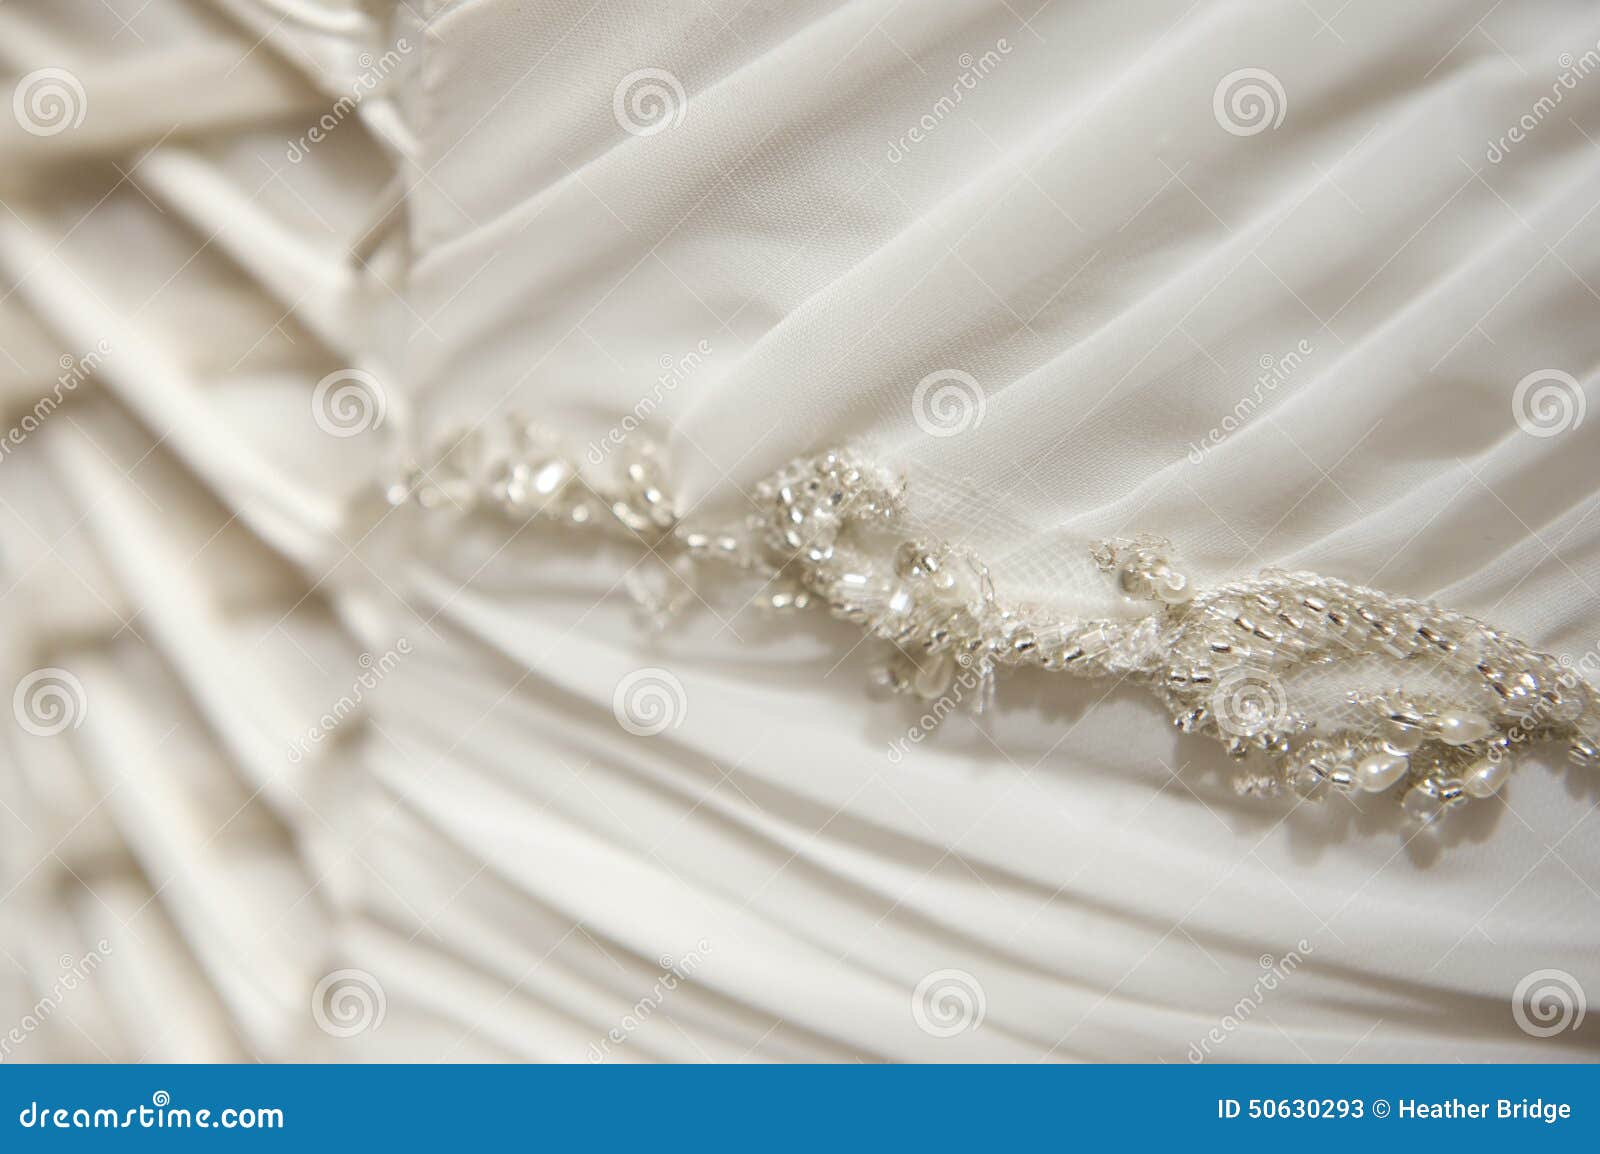 Bridal Dress Material & Hand Embroidered Fabric For Wedding Dresses